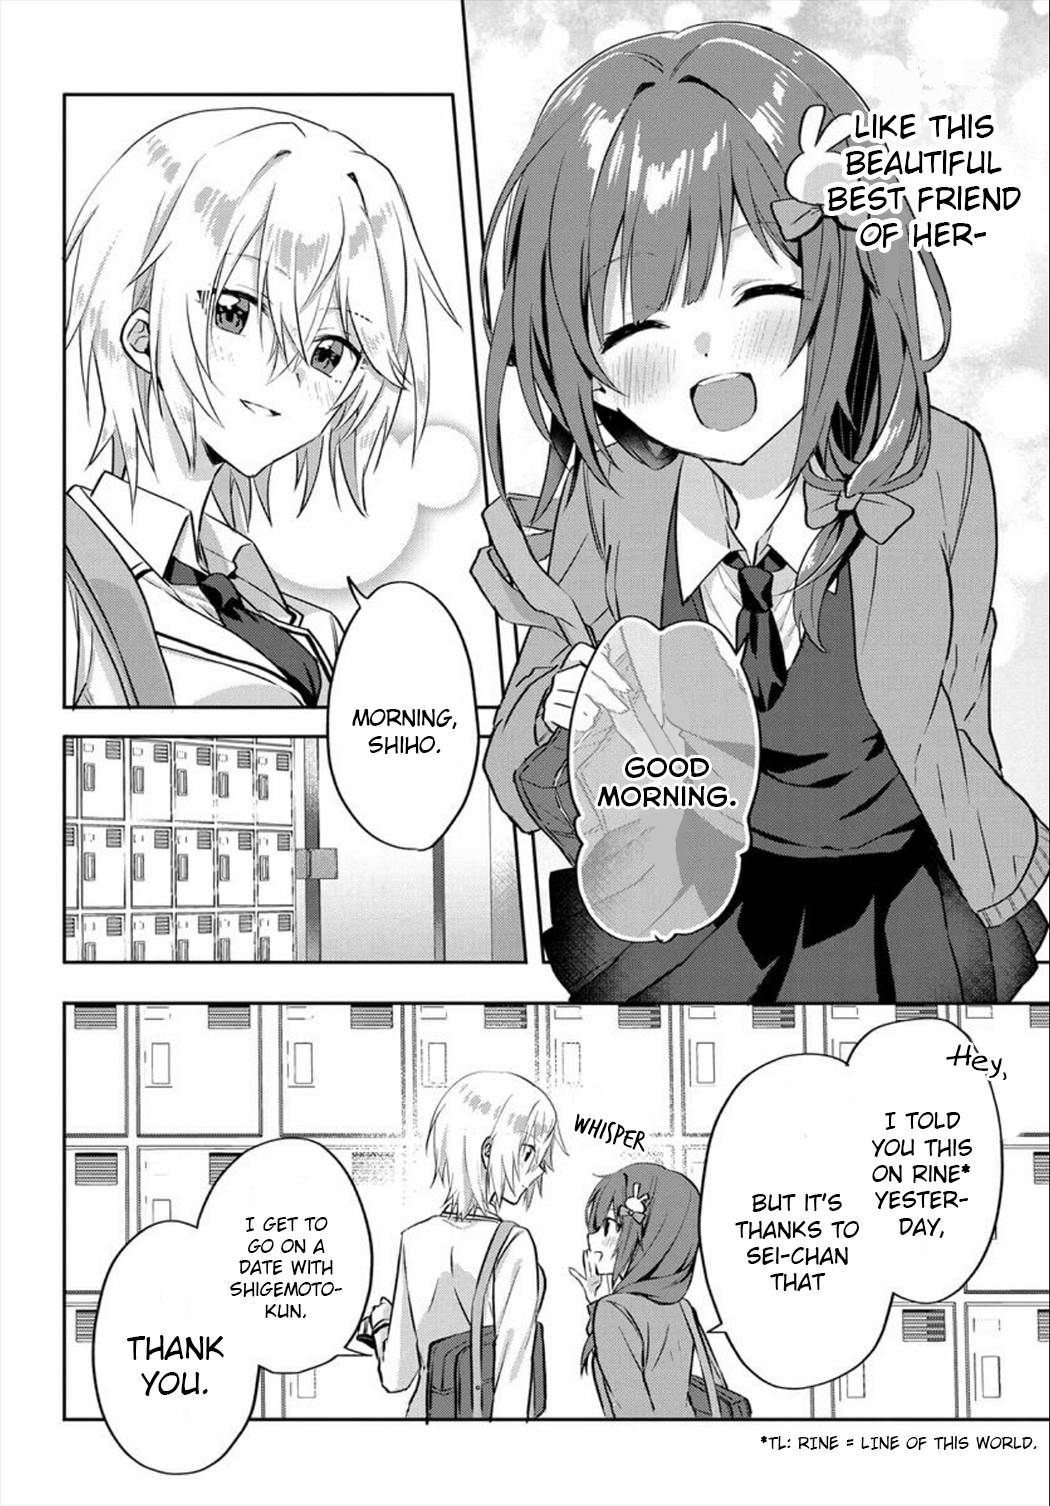 Since I’Ve Entered The World Of Romantic Comedy Manga, I’Ll Do My Best To Make The Losing Heroine Happy - chapter 2.1 - #4